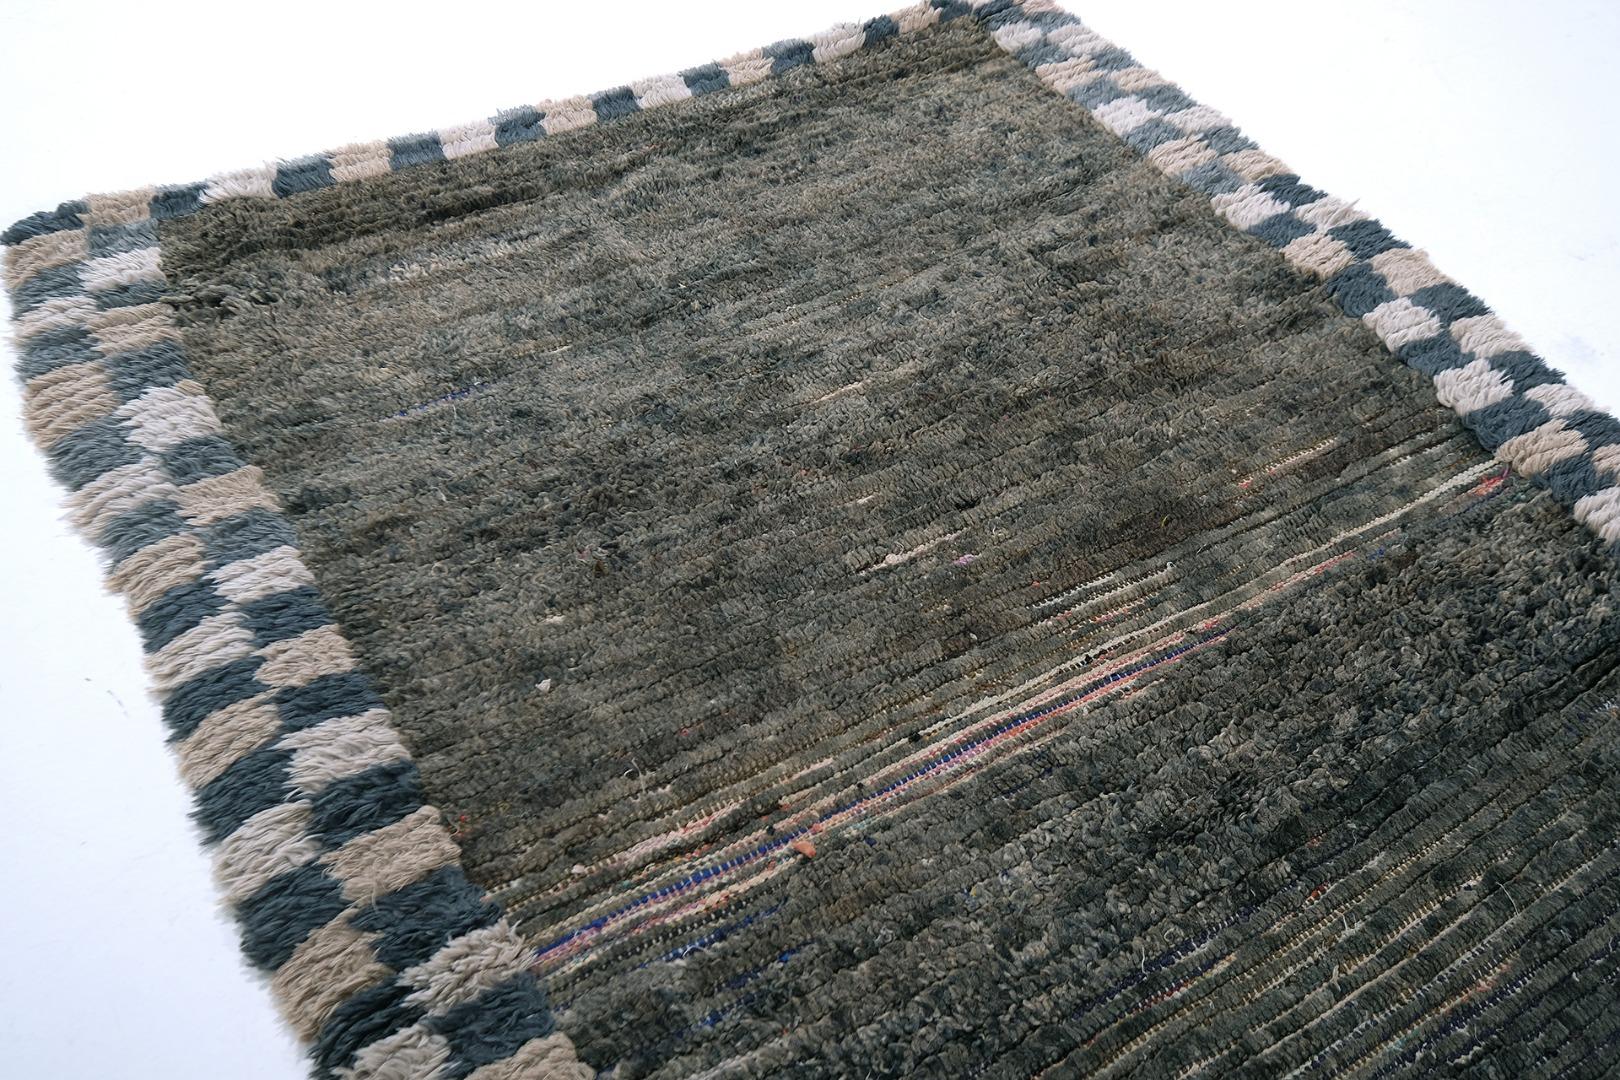 A multicolored earth-toned field with embossed detailing. Checkered borders bring a unique and cohesive vibe. This rug is a one-of-a-kind vintage rug from the Azilal region in the Atlas Mountains of central Morocco.



Rug Number 28457
Size 3'